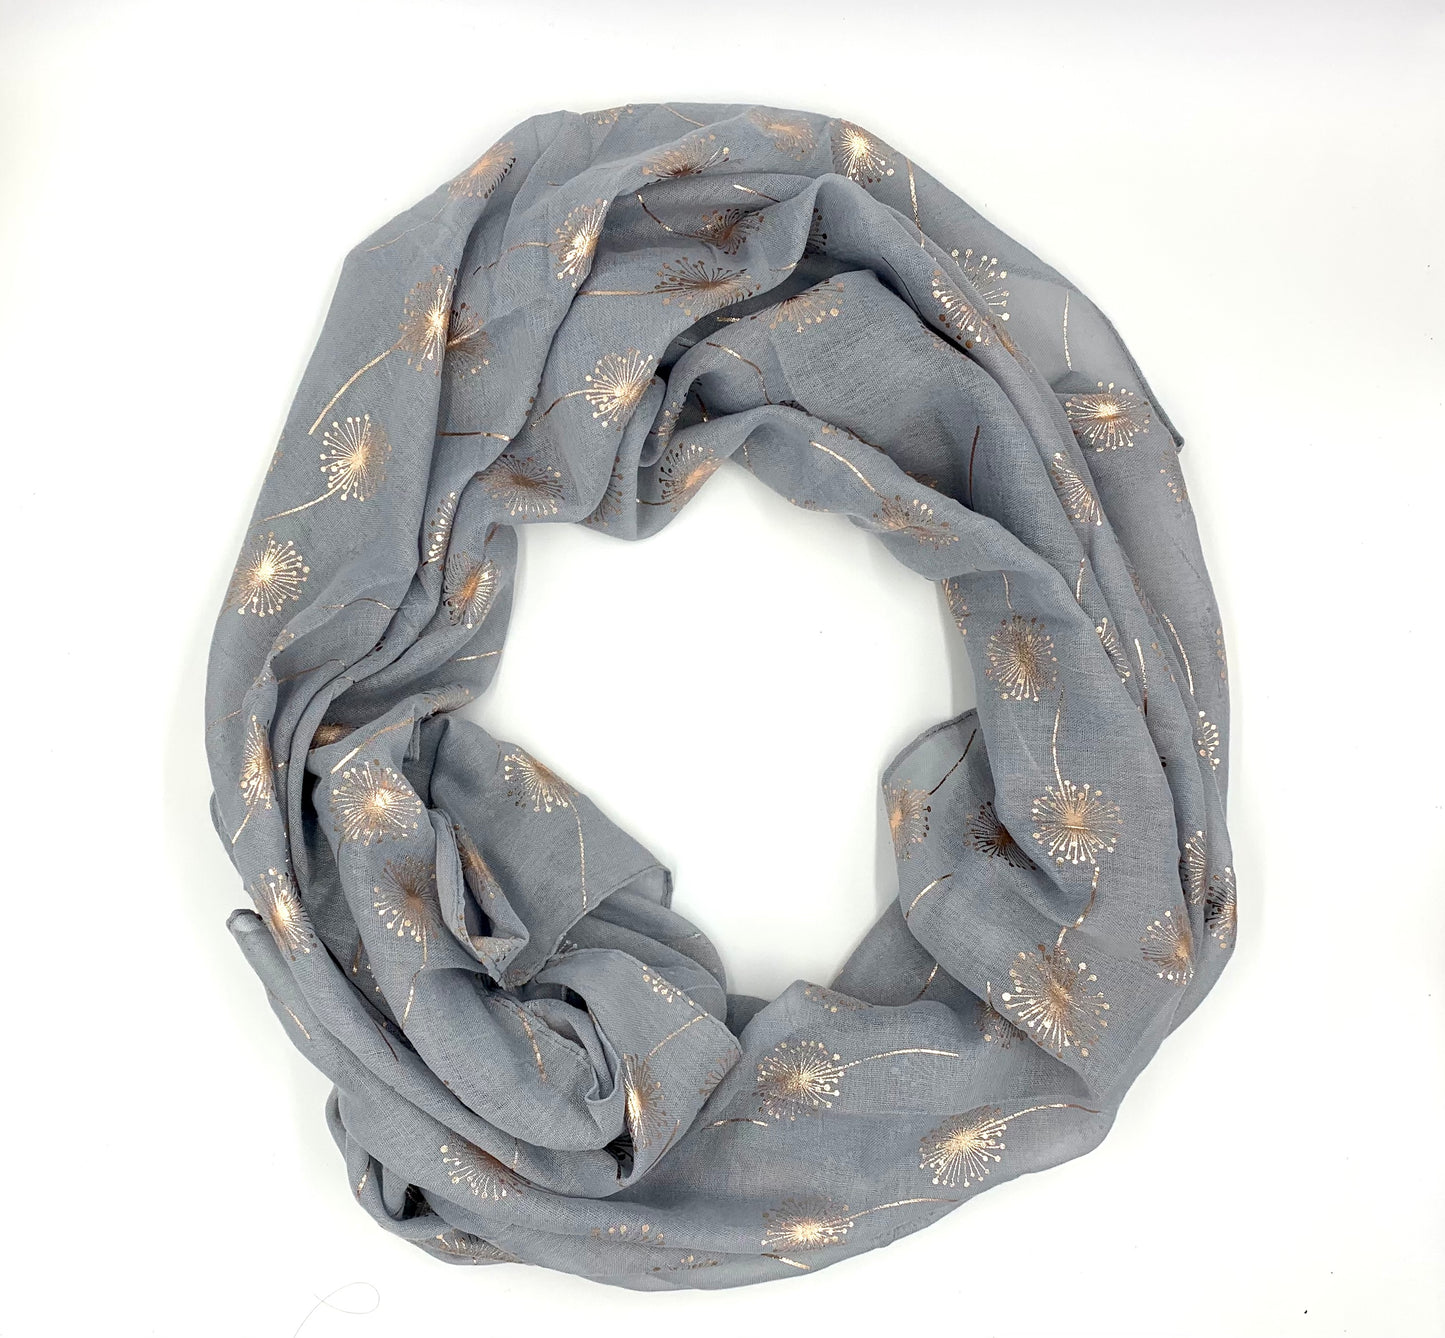 light grey and rose gold dandelion scarf on white background